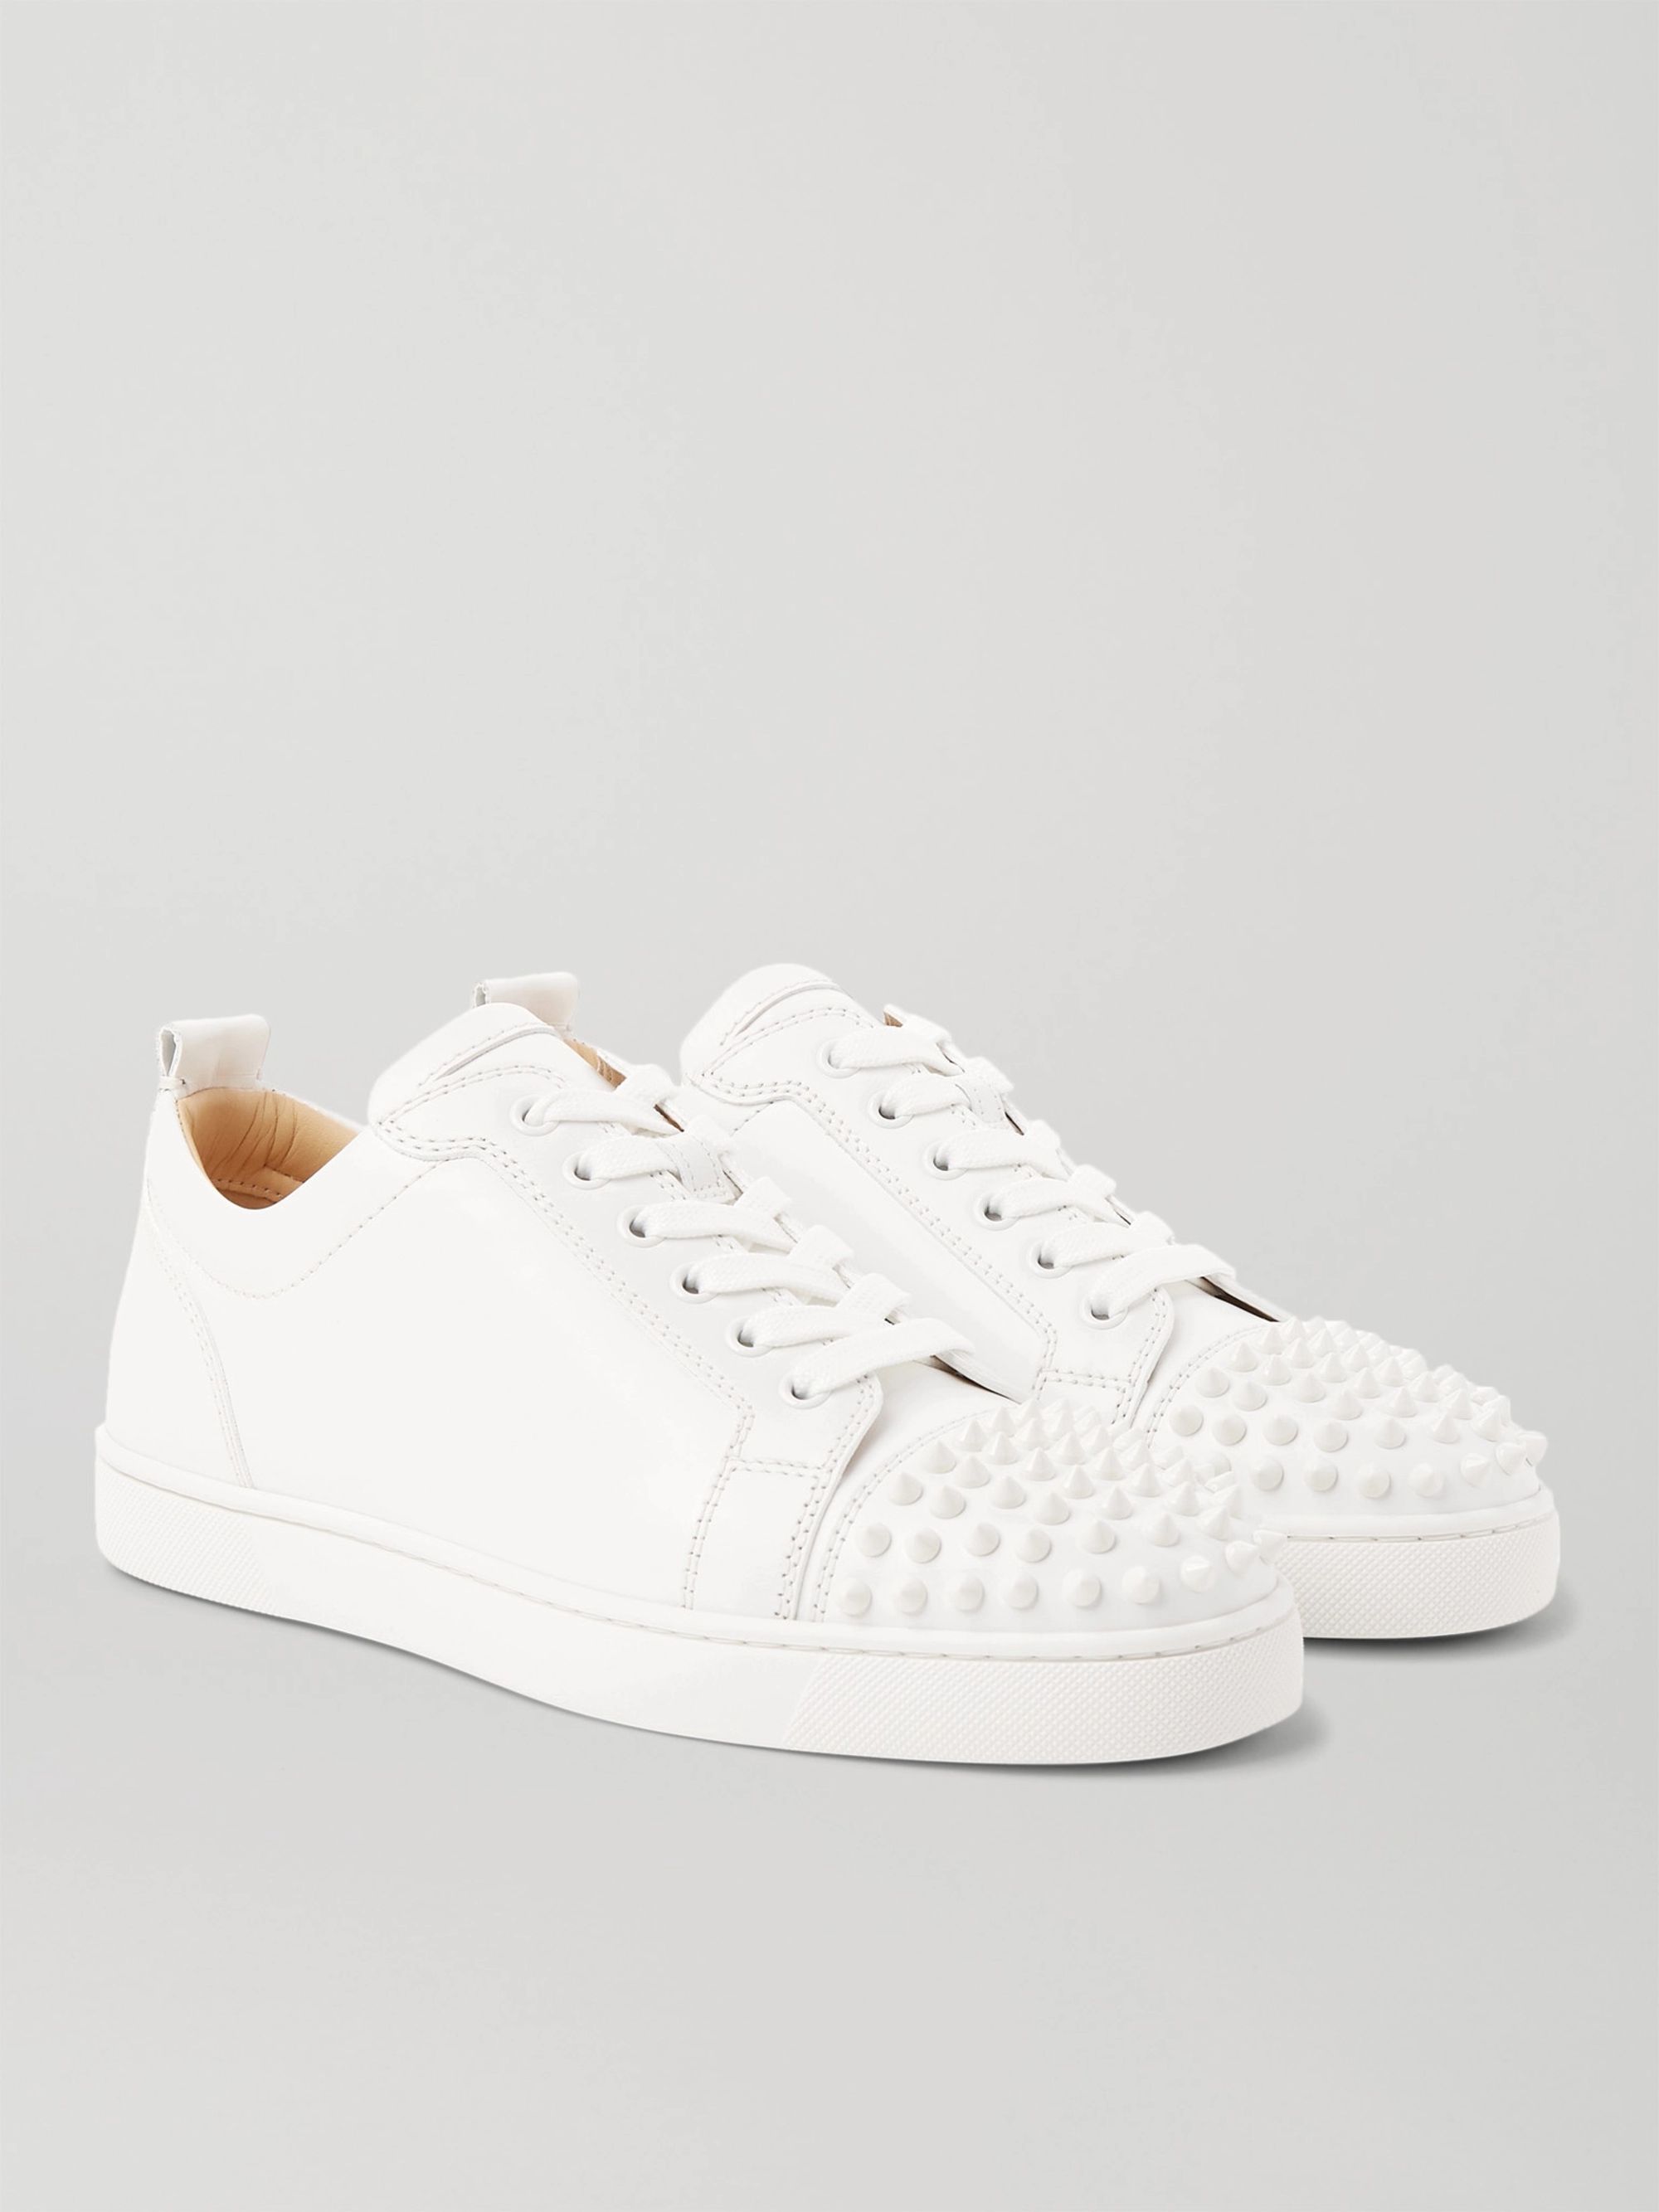 white louboutin spiked sneakers